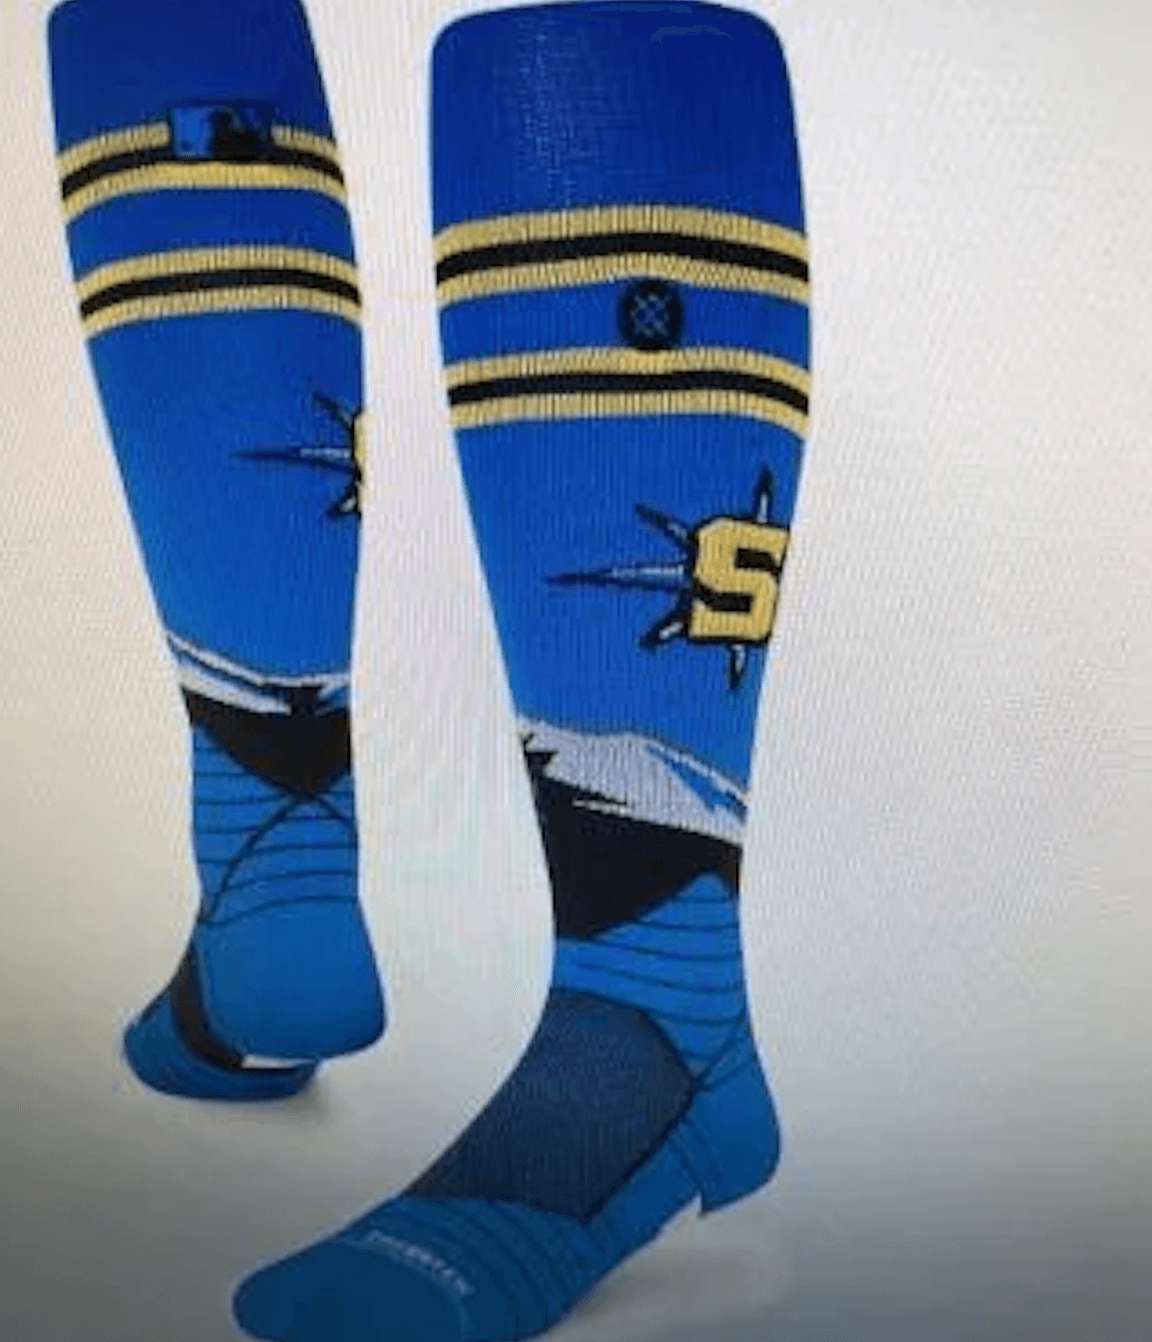 Leaked Socks (!) Hint at New MLB City Connect Unis